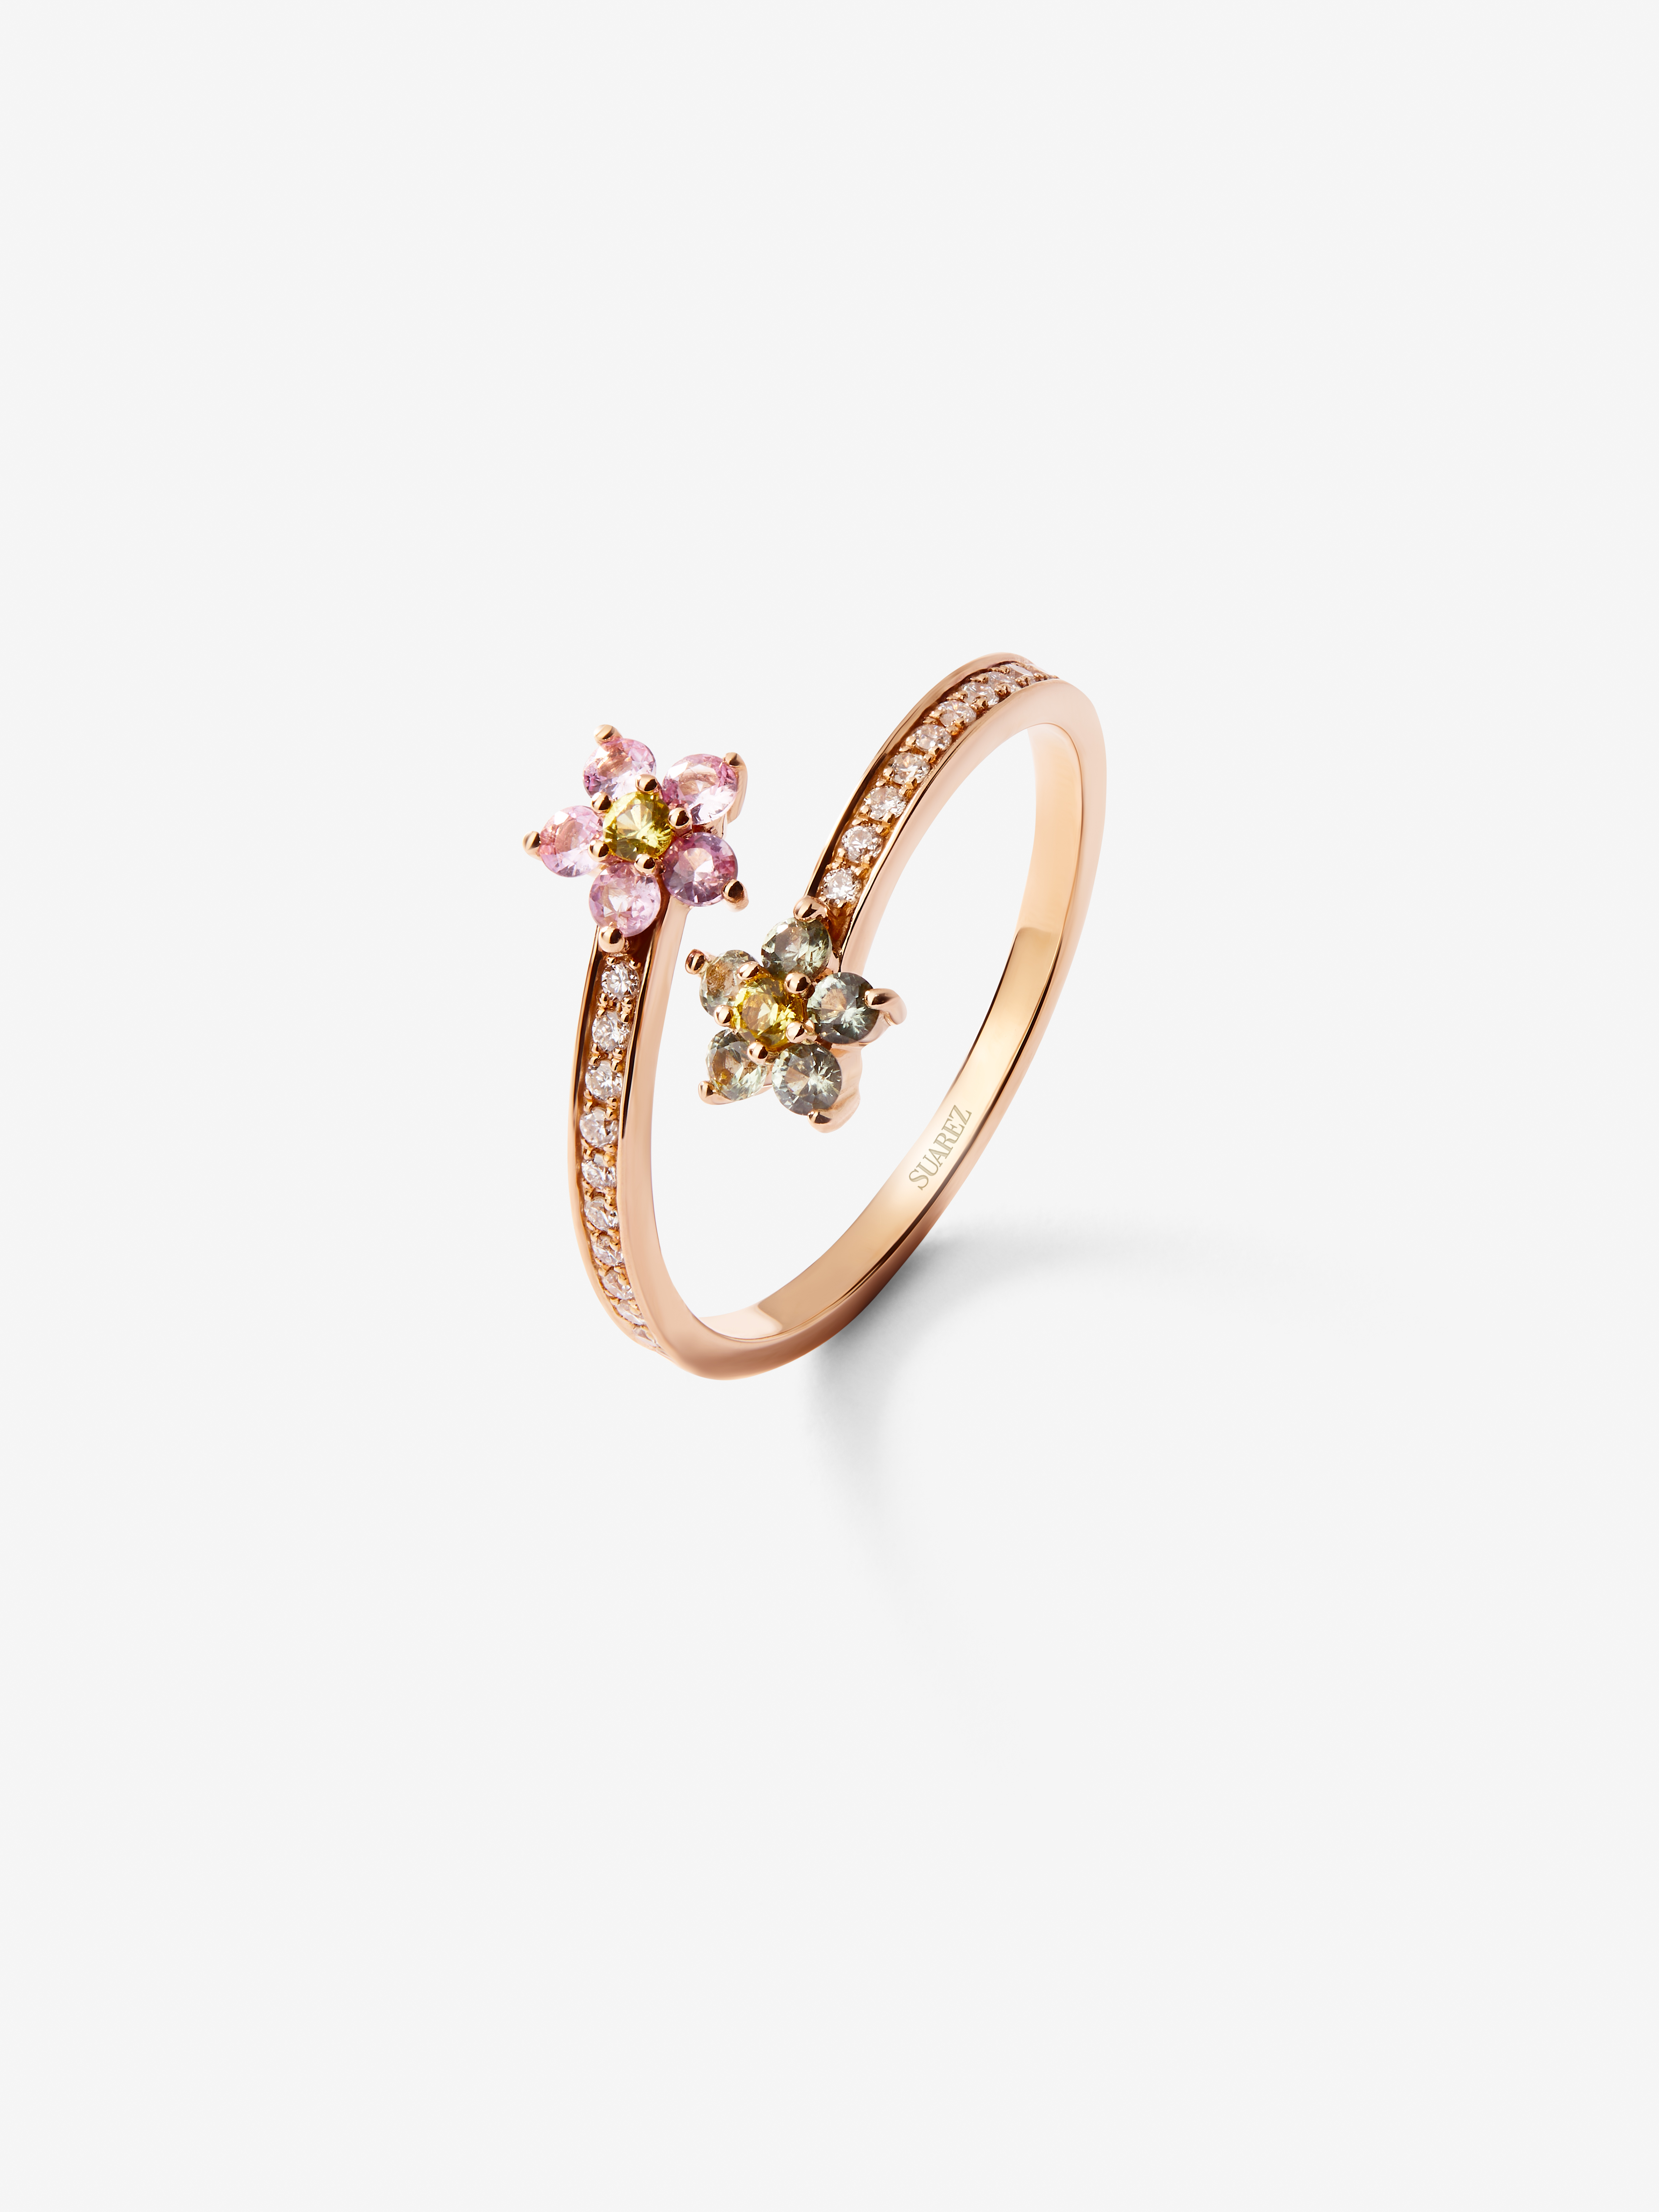 18K rose gold ring with pink and green sapphires in bright size of 0.26 cts and white diamonds in bright 0.1 cts